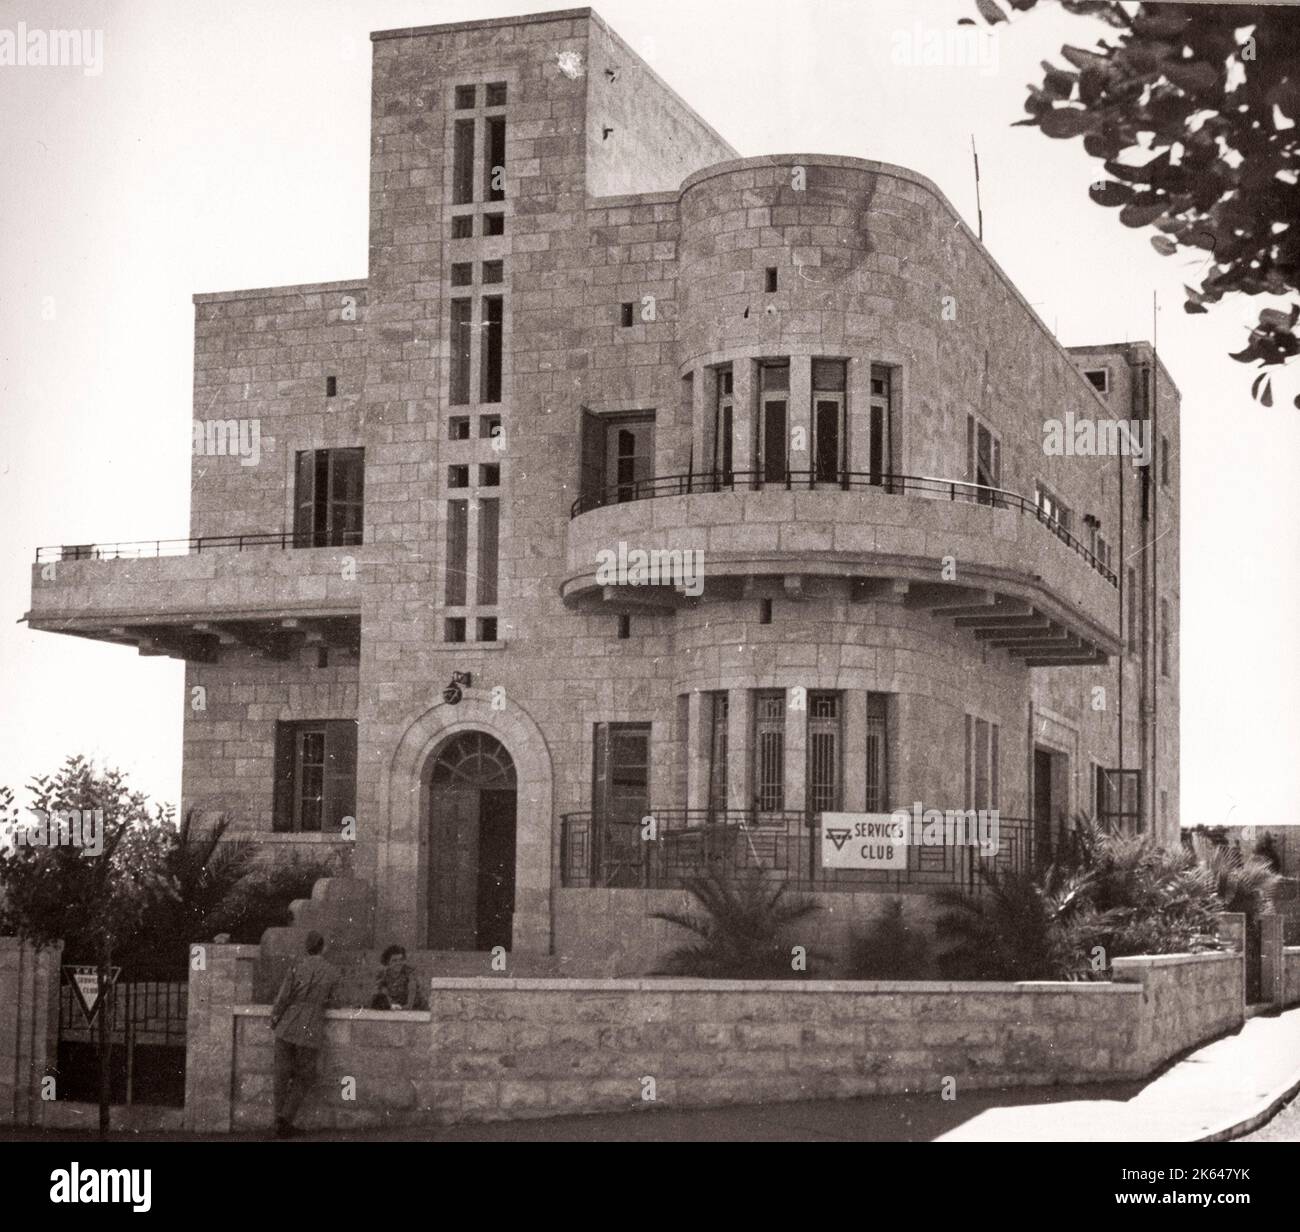 1943 - Jerusalem, Palestine (Israel) - modern architecture, new buildings Photograph by a British army recruitment officer stationed in East Africa and the Middle East during World War II Stock Photo